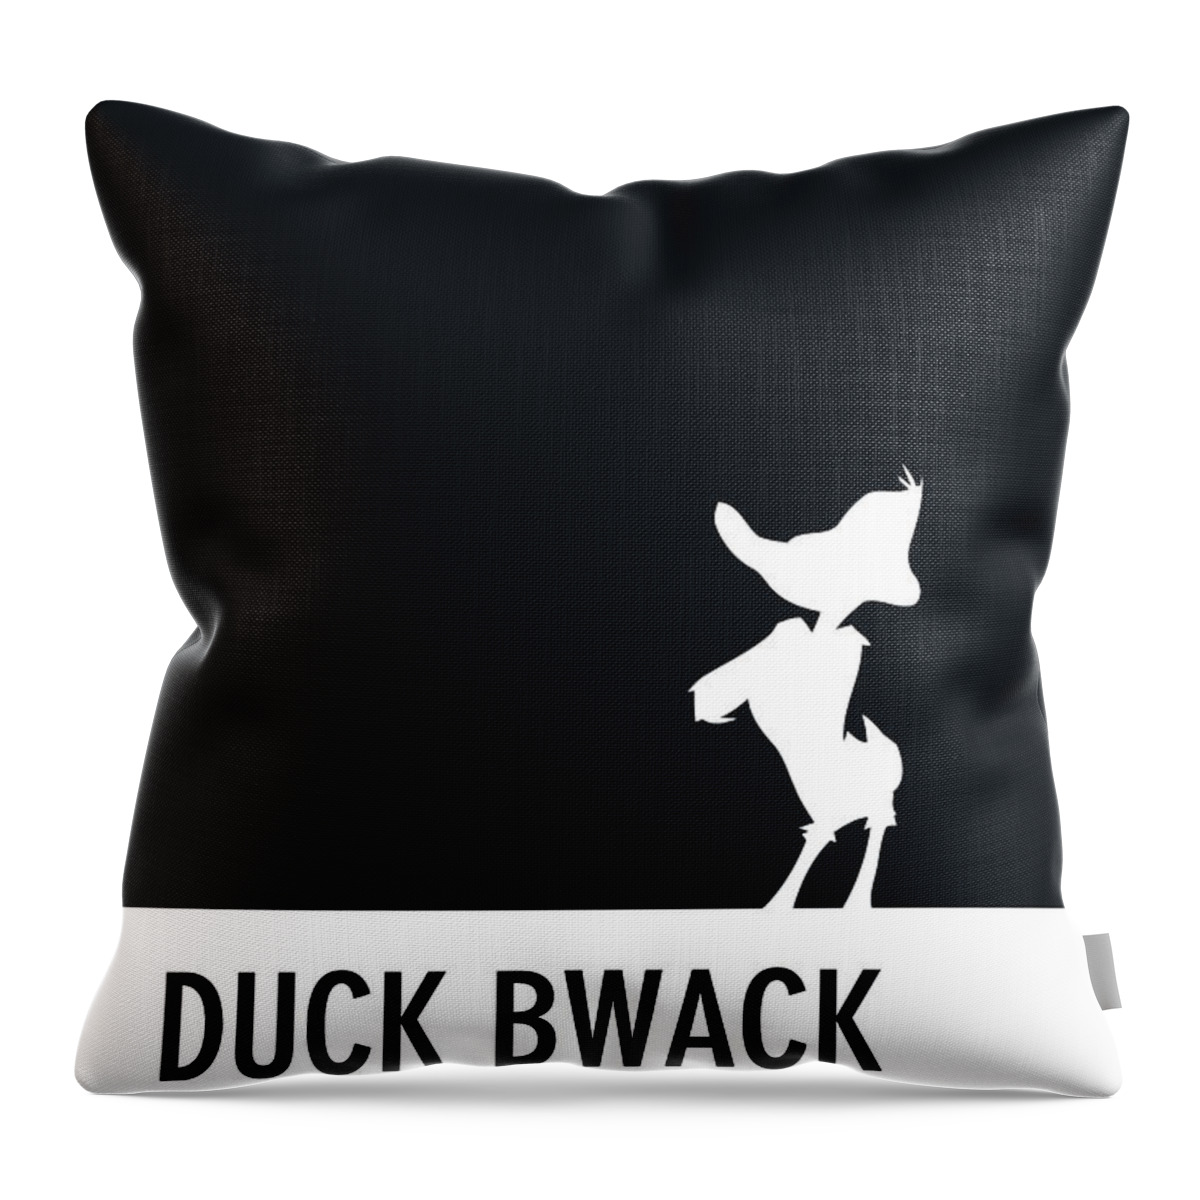 Brain Throw Pillow featuring the digital art No03 My Minimal Color Code poster Daffy Duck by Chungkong Art